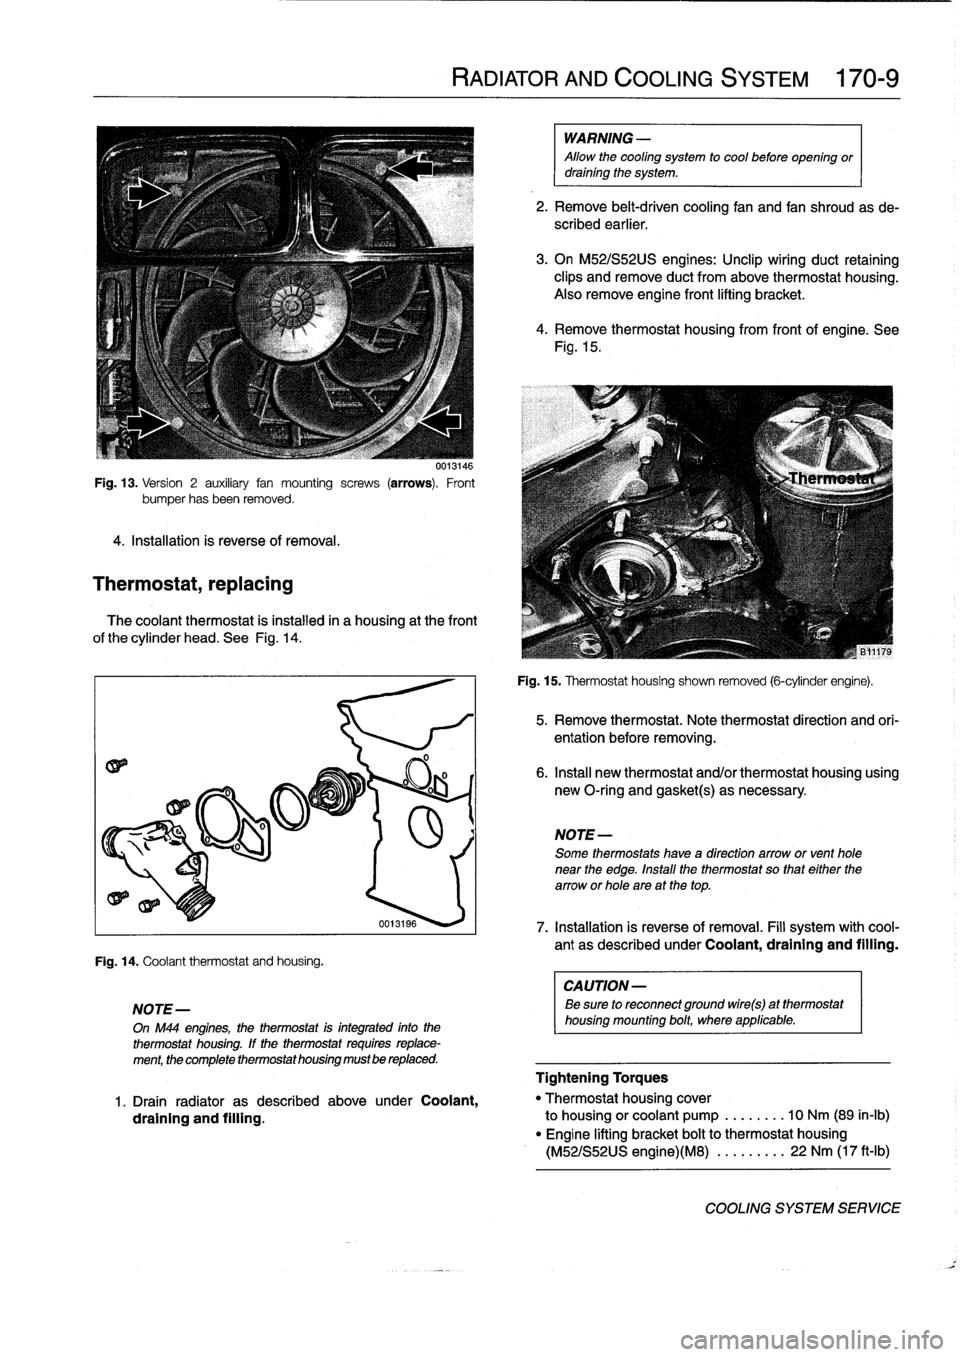 BMW 318i 1997 E36 Service Manual 
Fig
.
13
.
Version
2
auxiliary
fan
mounting
screws
(arrows)
.
Front
bumper
hasbeen
removed
.

4
.
Installation
is
reverse
of
removal
.

Thermostat,
replacing

0013146

The
coolant
thermostat
is
insta